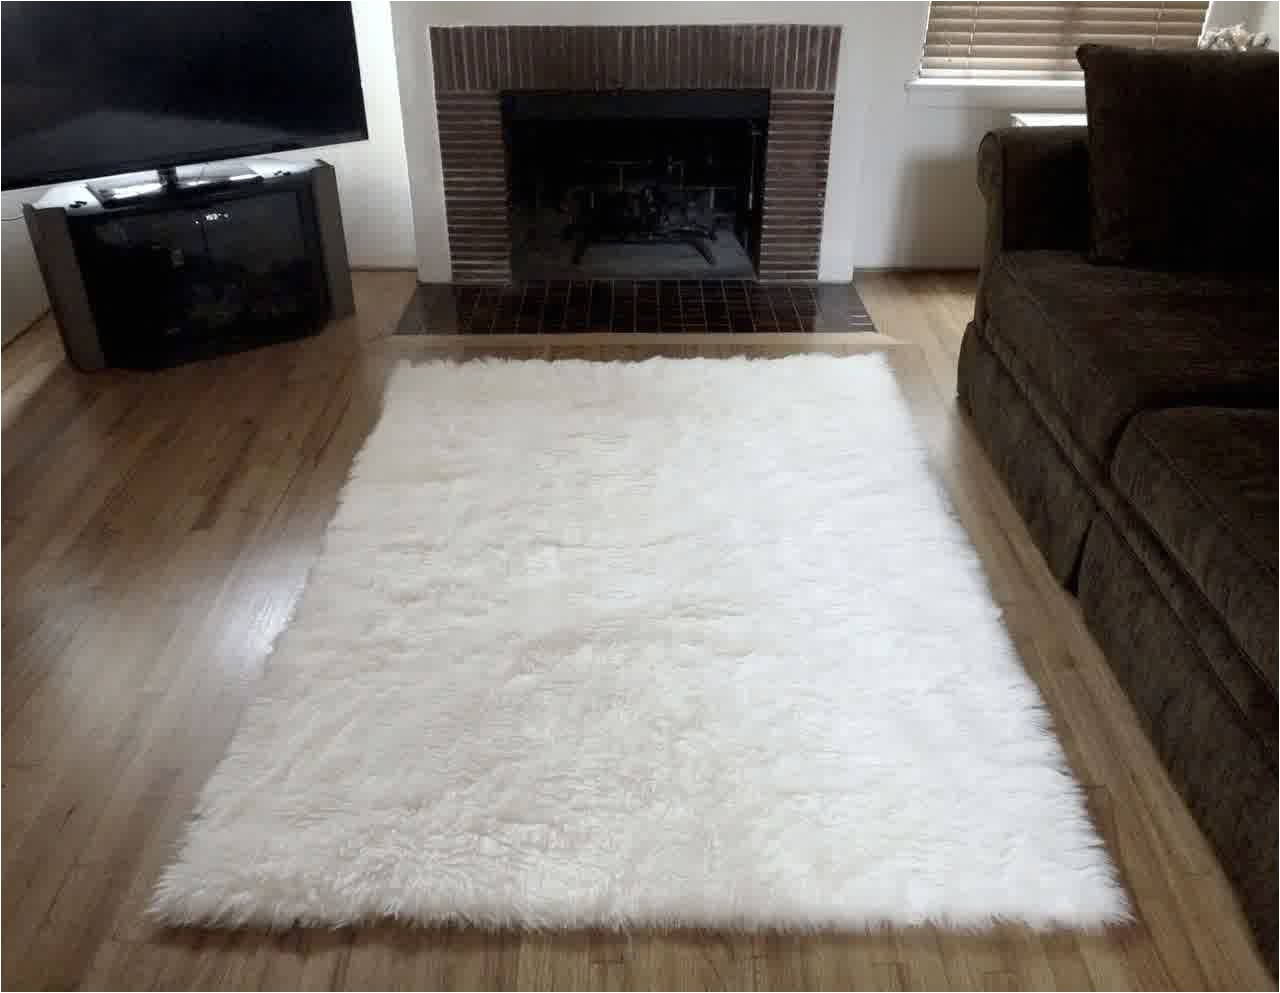 26 Perfect Living Room Rug On Hardwood Floor 2024 free download living room rug on hardwood floor of ikea white faux fur rug extraordinary living room decorating ideas pertaining to ikea white faux fur rug extraordinary living room decorating ideas shag 